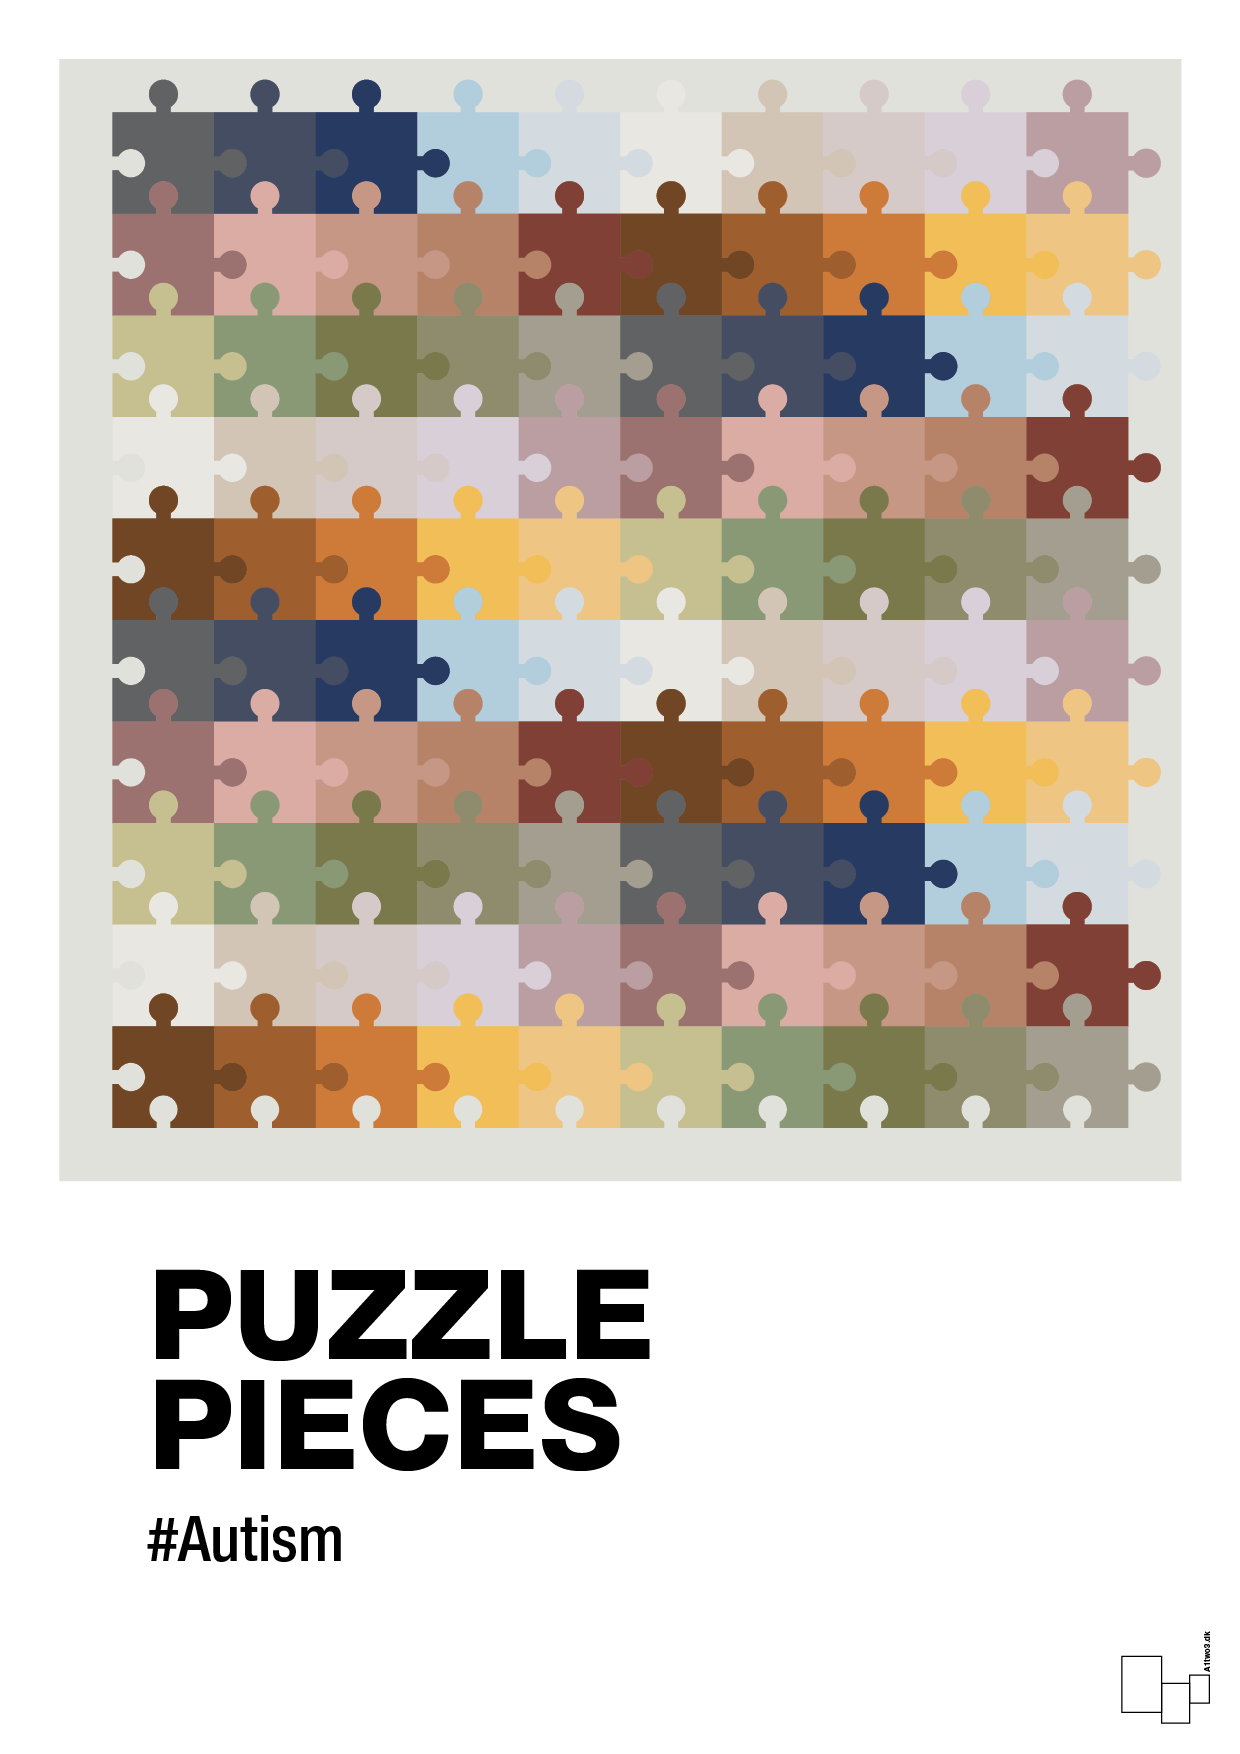 puzzle pieces - Plakat med Samfund i Painters White